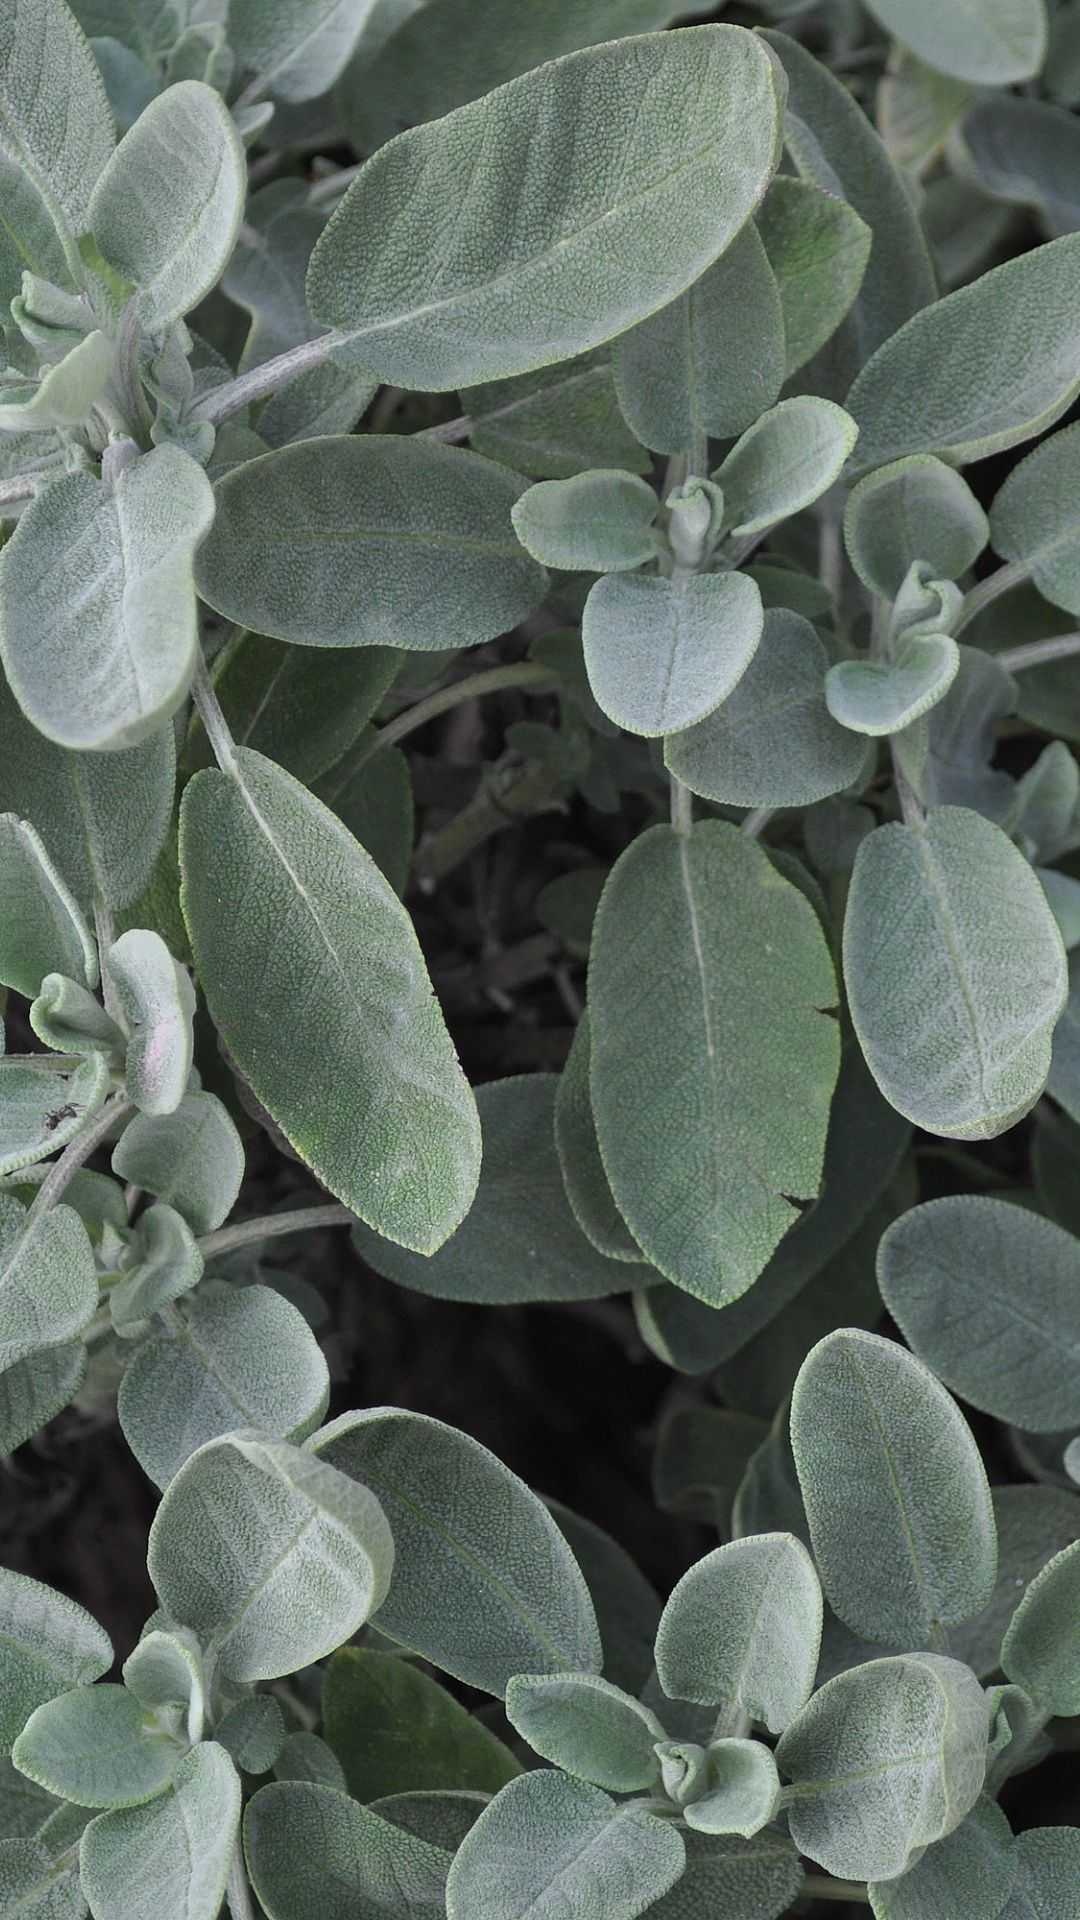 Aesthetic sage wallpaper, Nature-inspired, Serene green, High-definition image, 1080x1920 Full HD Handy